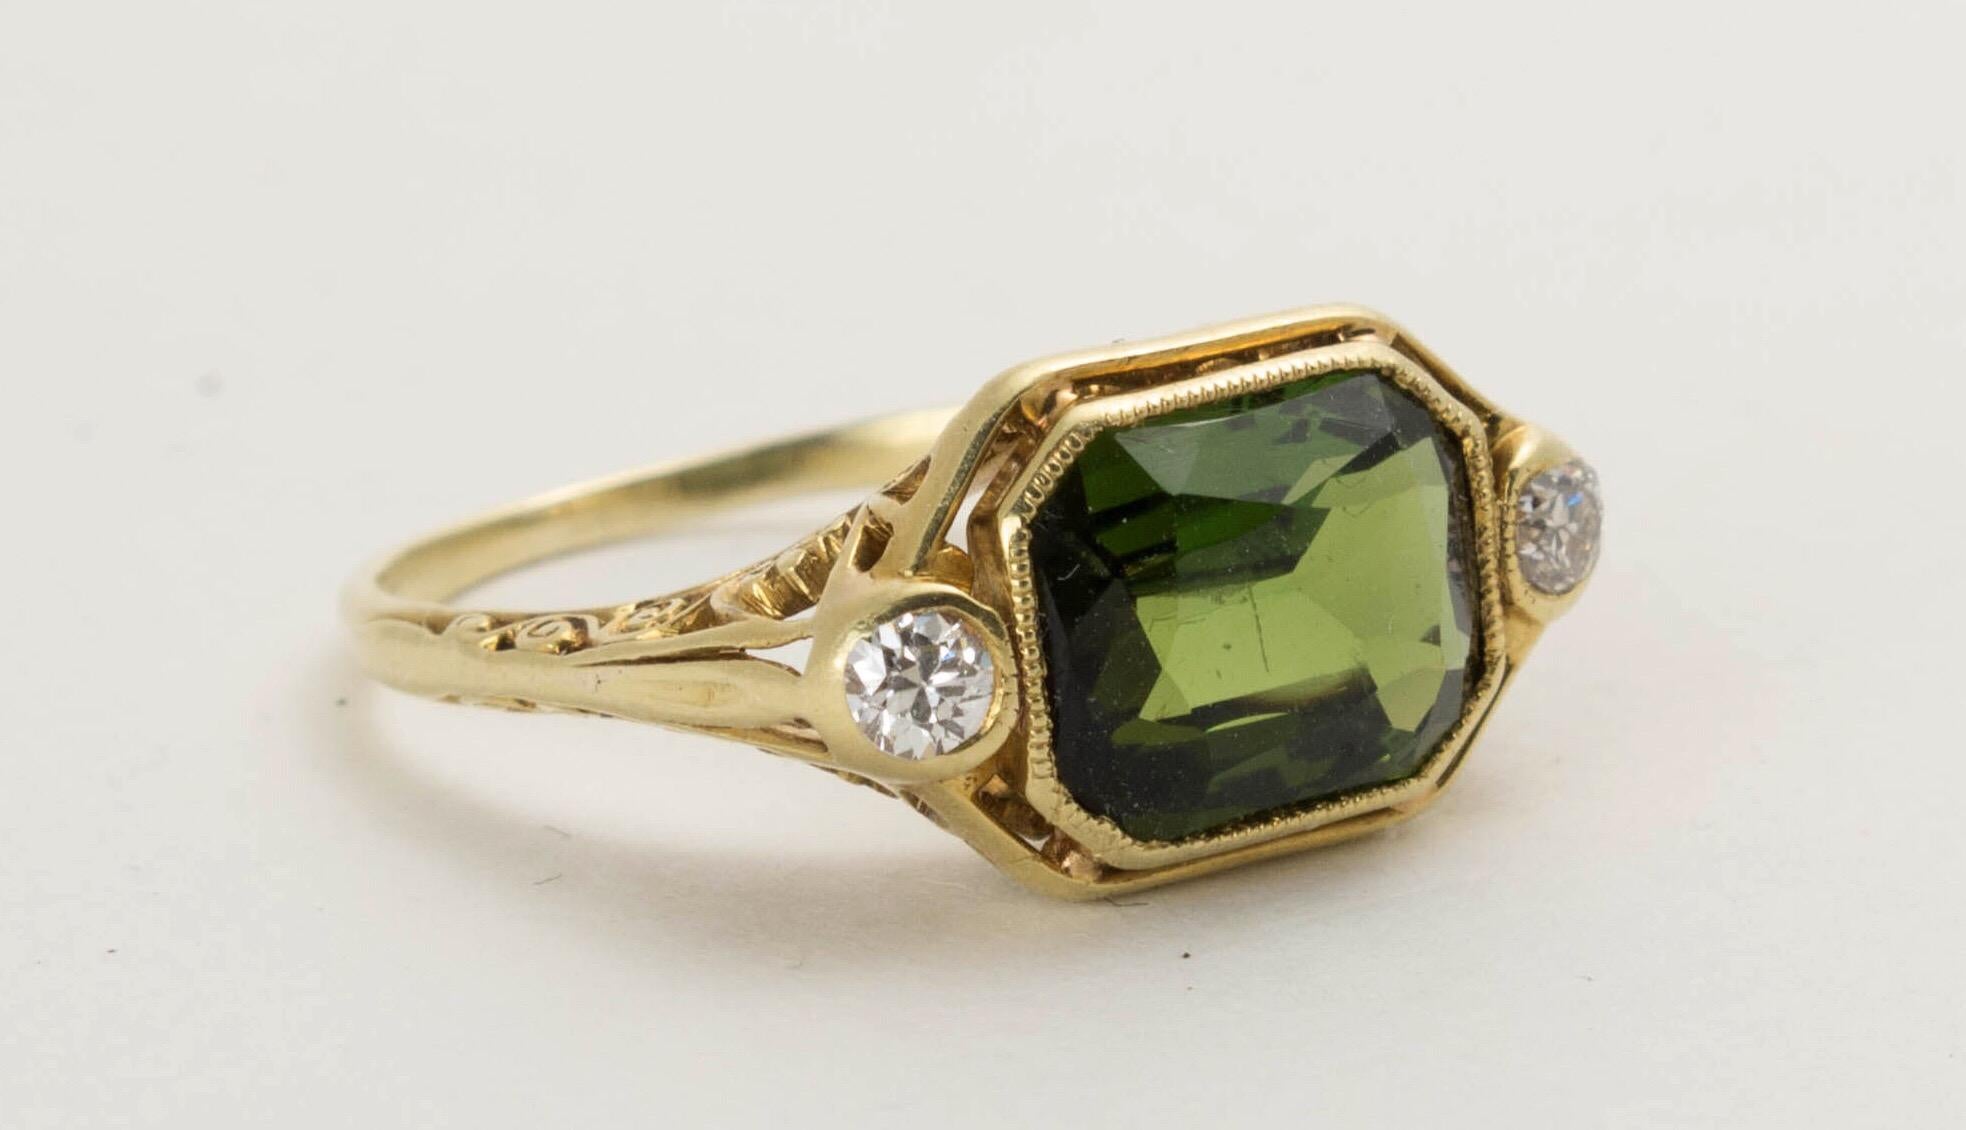 An antique art deco era Larter & Son 18 k yellow gold filigree ring with diamonds flanked on each side of a beautiful emerald cut green tourmaline.

Ring size: 6.5. Ring top is 9mm x 16mm.  Diamonds weight approx. 0.10 carats.  Maker's mark, 18k.